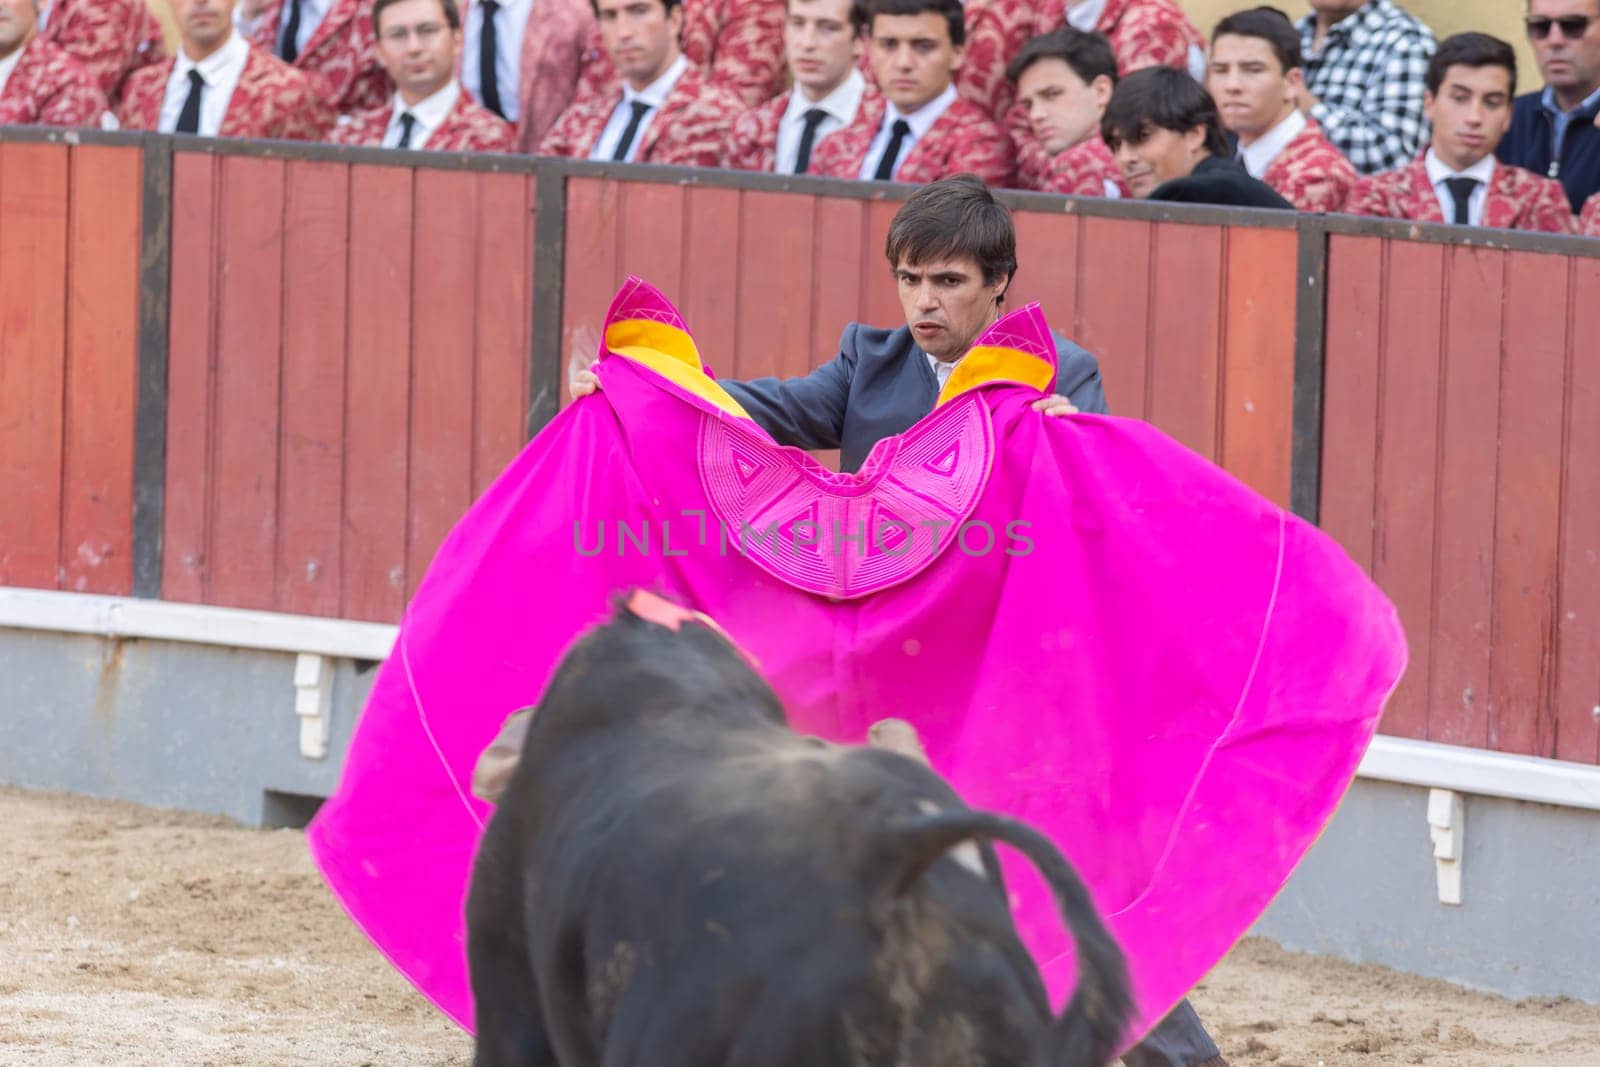 March 26, 2023 Lisbon, Portugal: Tourada - bullfighter provoking the bull with a bright rag on arena. Mid shot